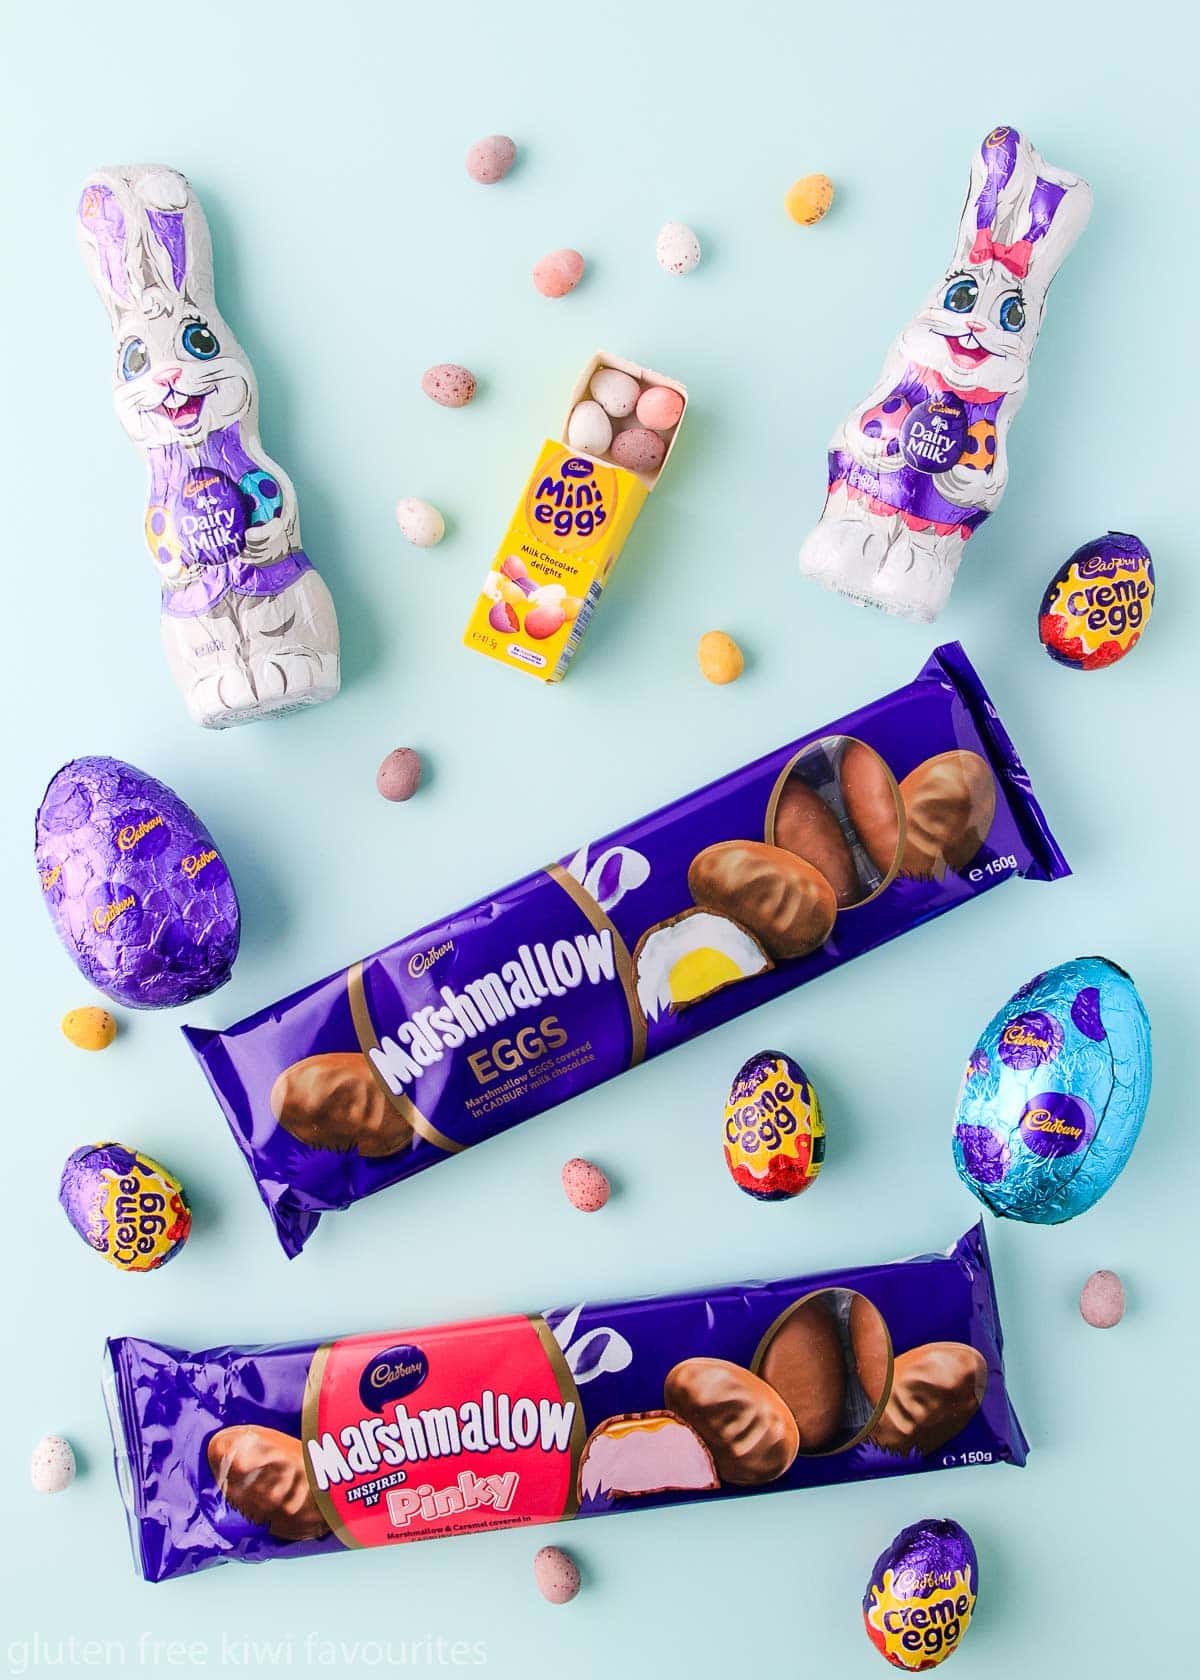 Some of the Cadbury easter products that are gluten free - marshmallow eggs, mini eggs, hollow bunnies, hollow eggs and creme eggs.